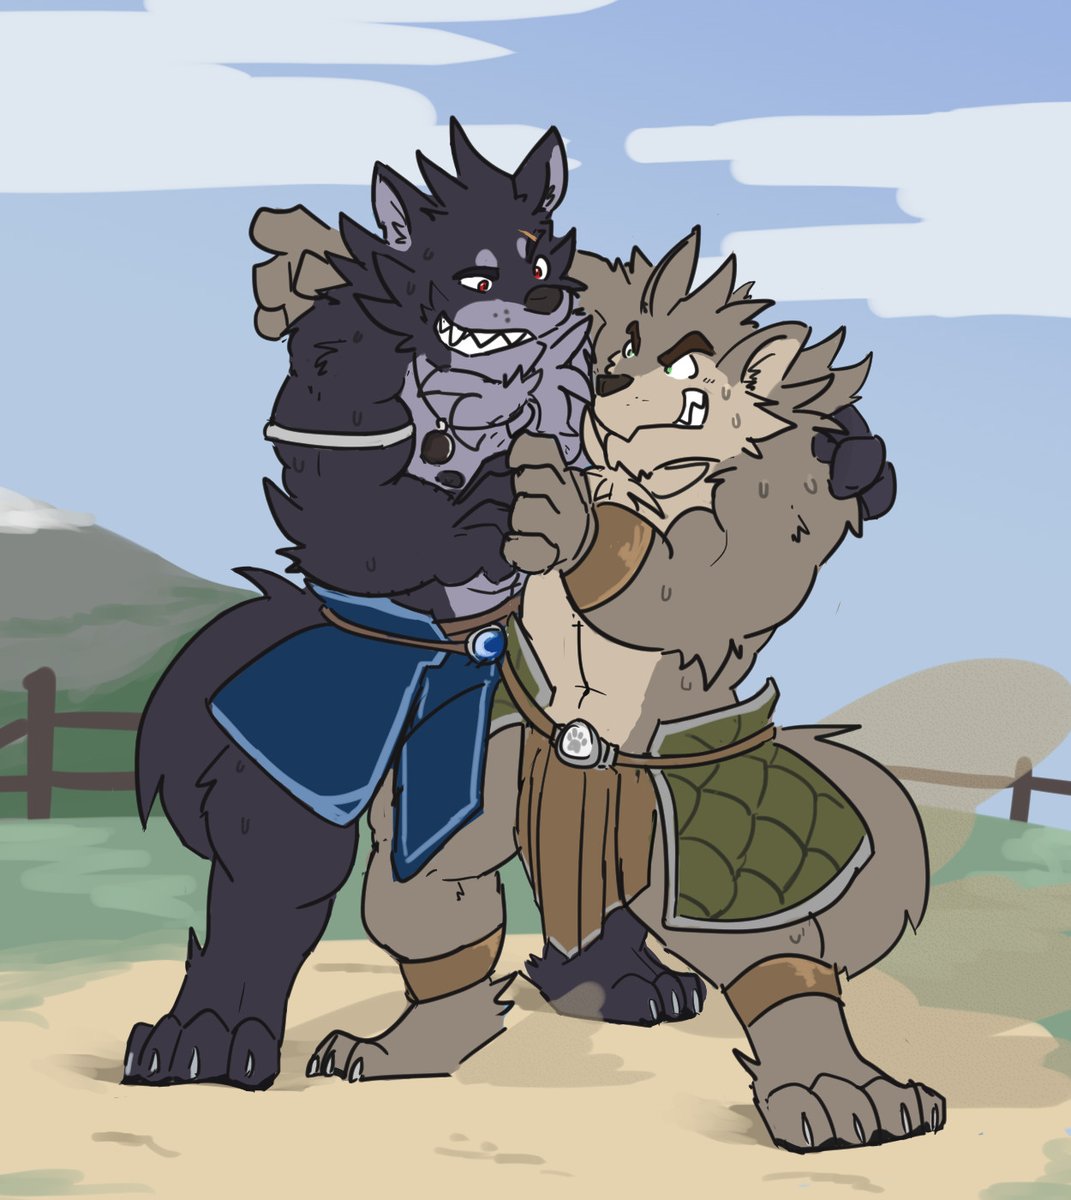 Friendly Fight commission for @Kael_Tiger with Vulgor and Ranok from Far Be...